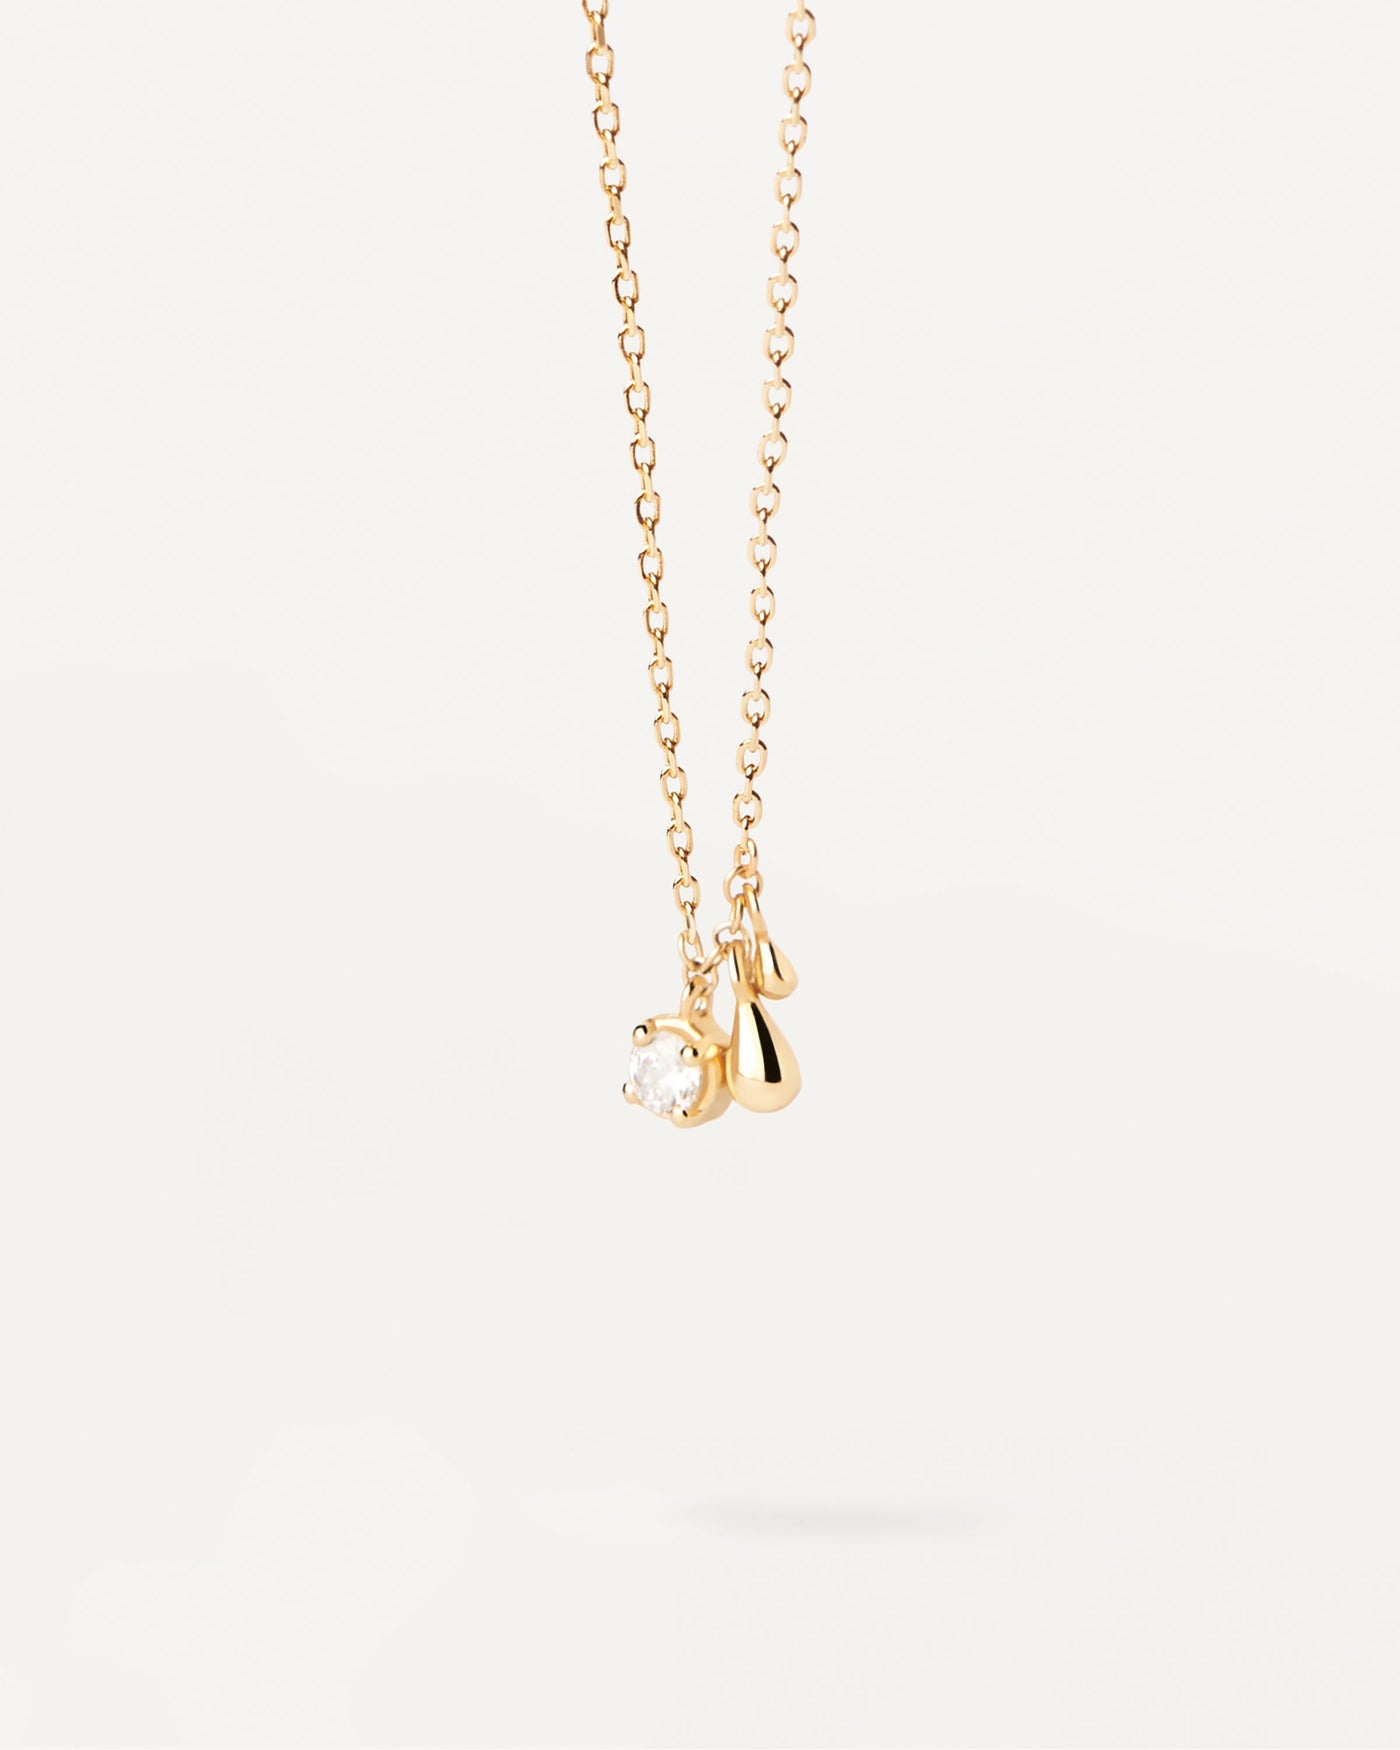 2023 Selection | Water Necklace. Gold-plated silver necklace with white zirconia and two small drop pendants. Get the latest arrival from PDPAOLA. Place your order safely and get this Best Seller. Free Shipping.